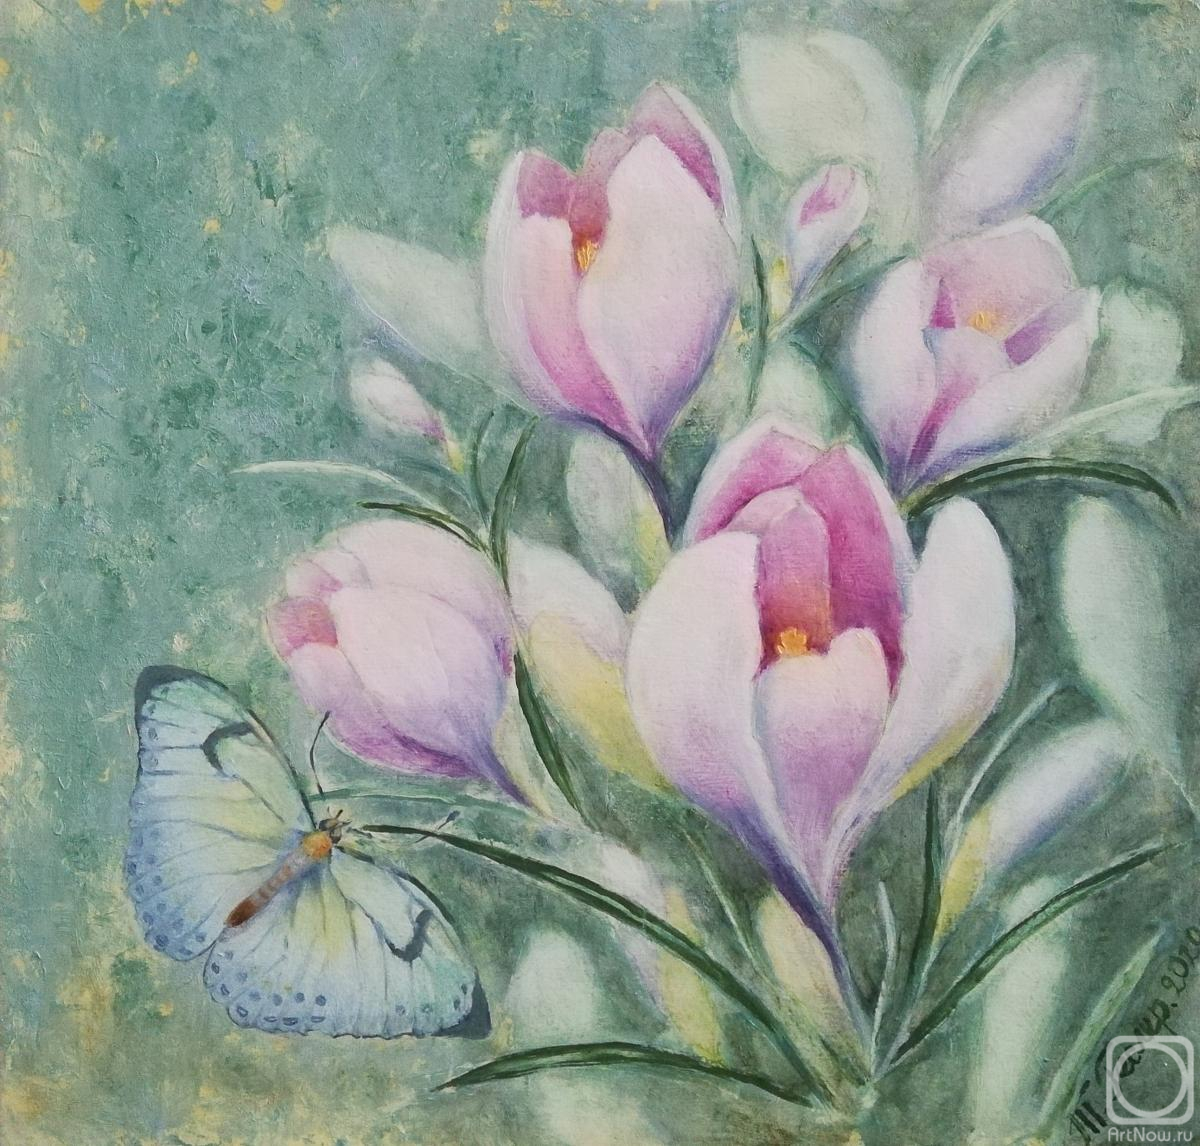 Gesler Tatyana. Snowdrops with a butterfly